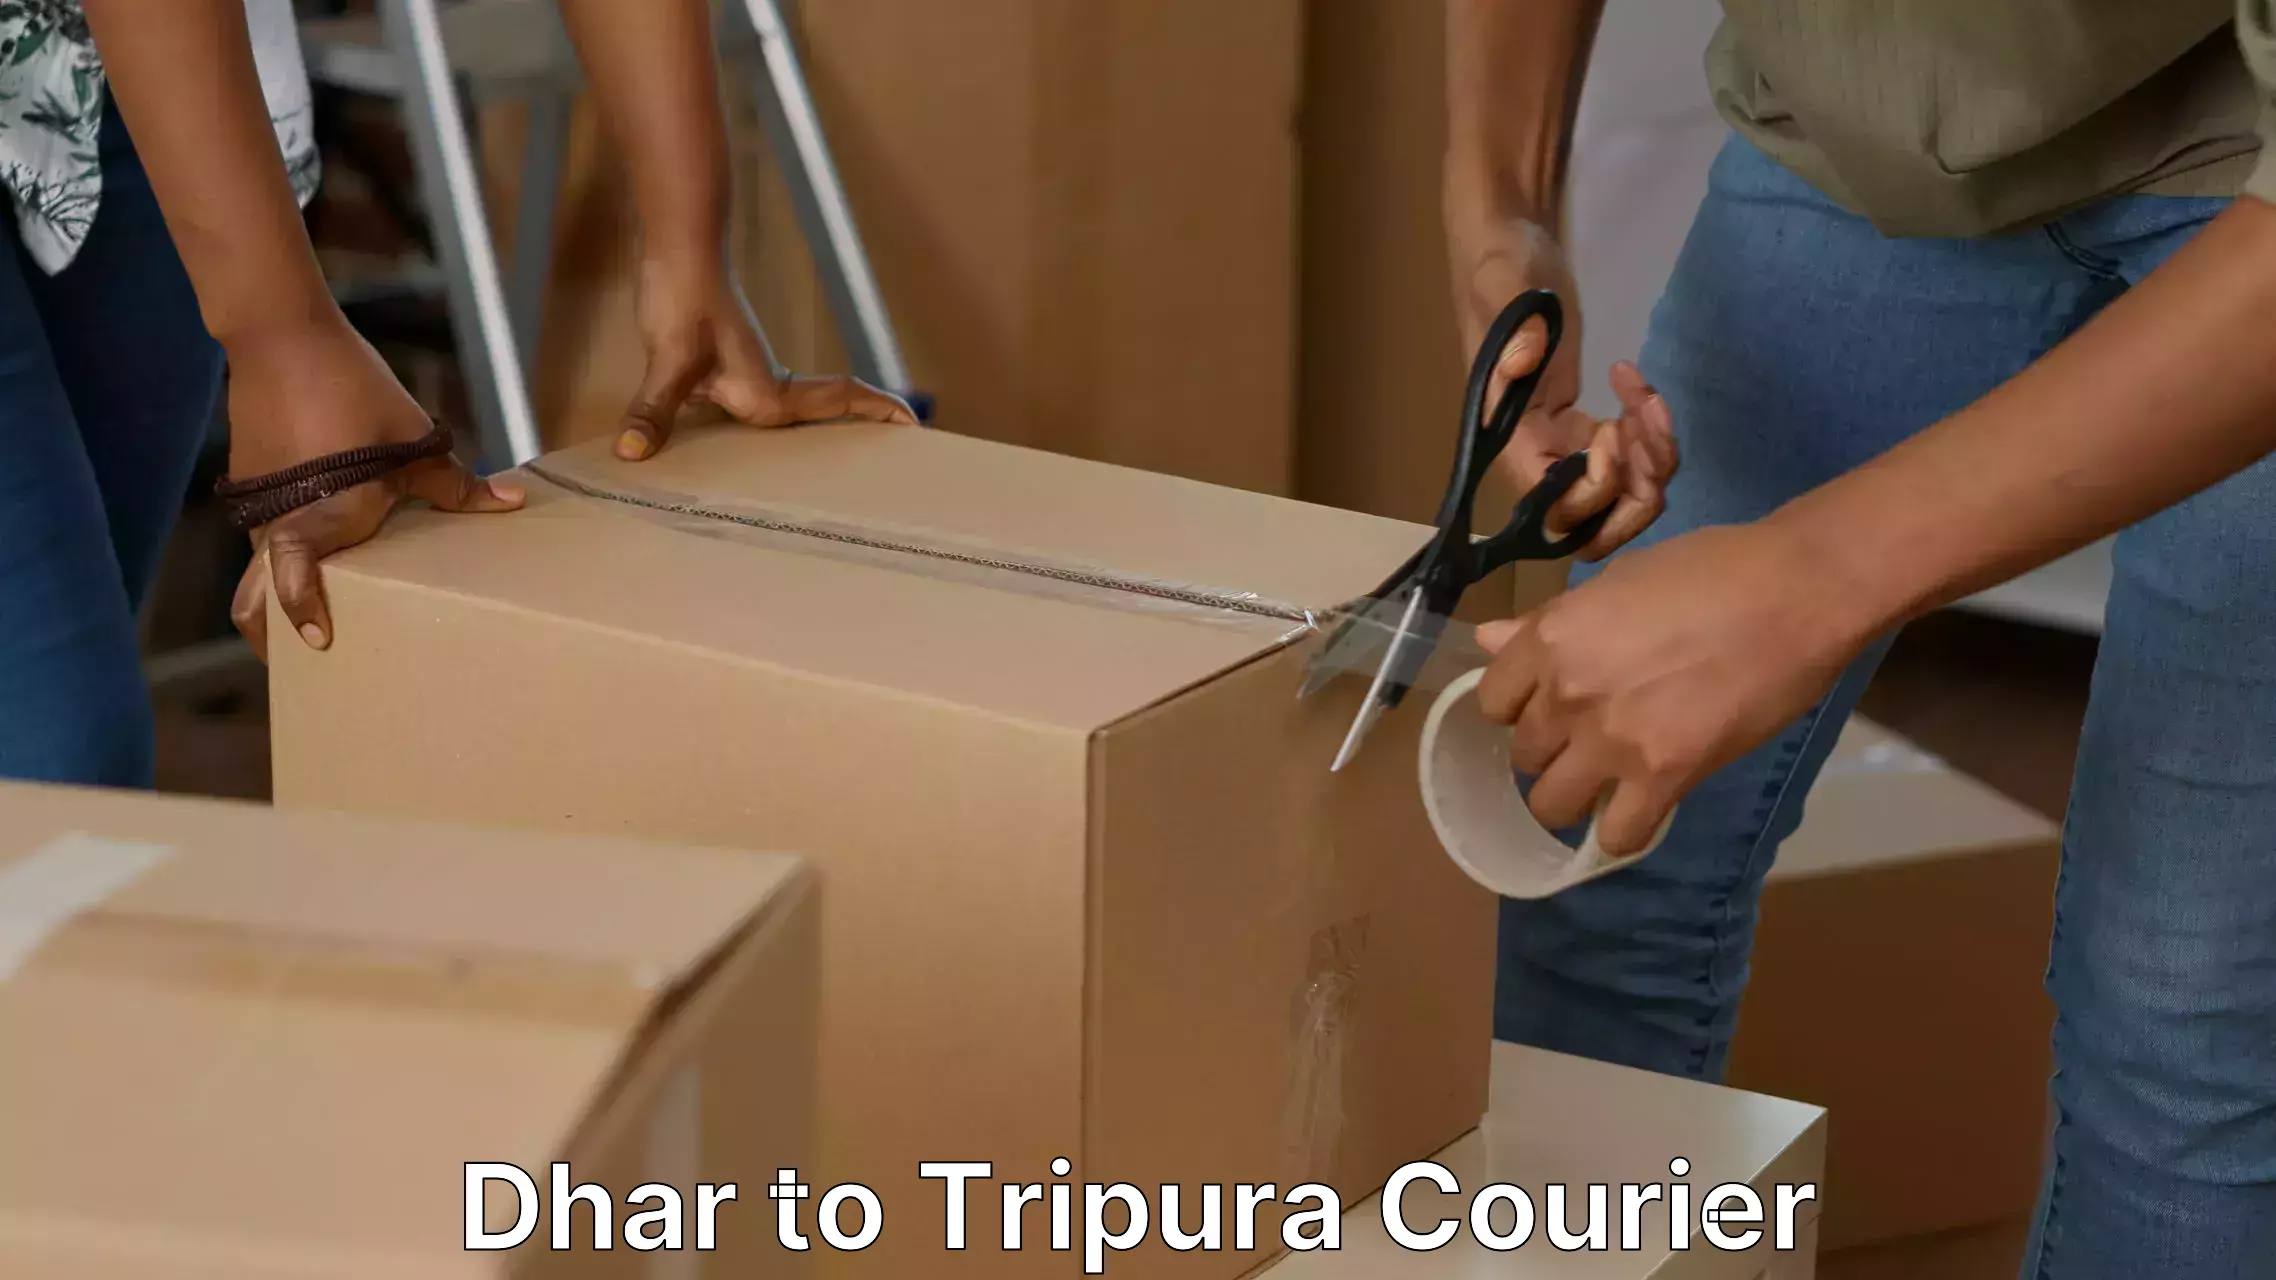 Professional movers Dhar to Udaipur Tripura